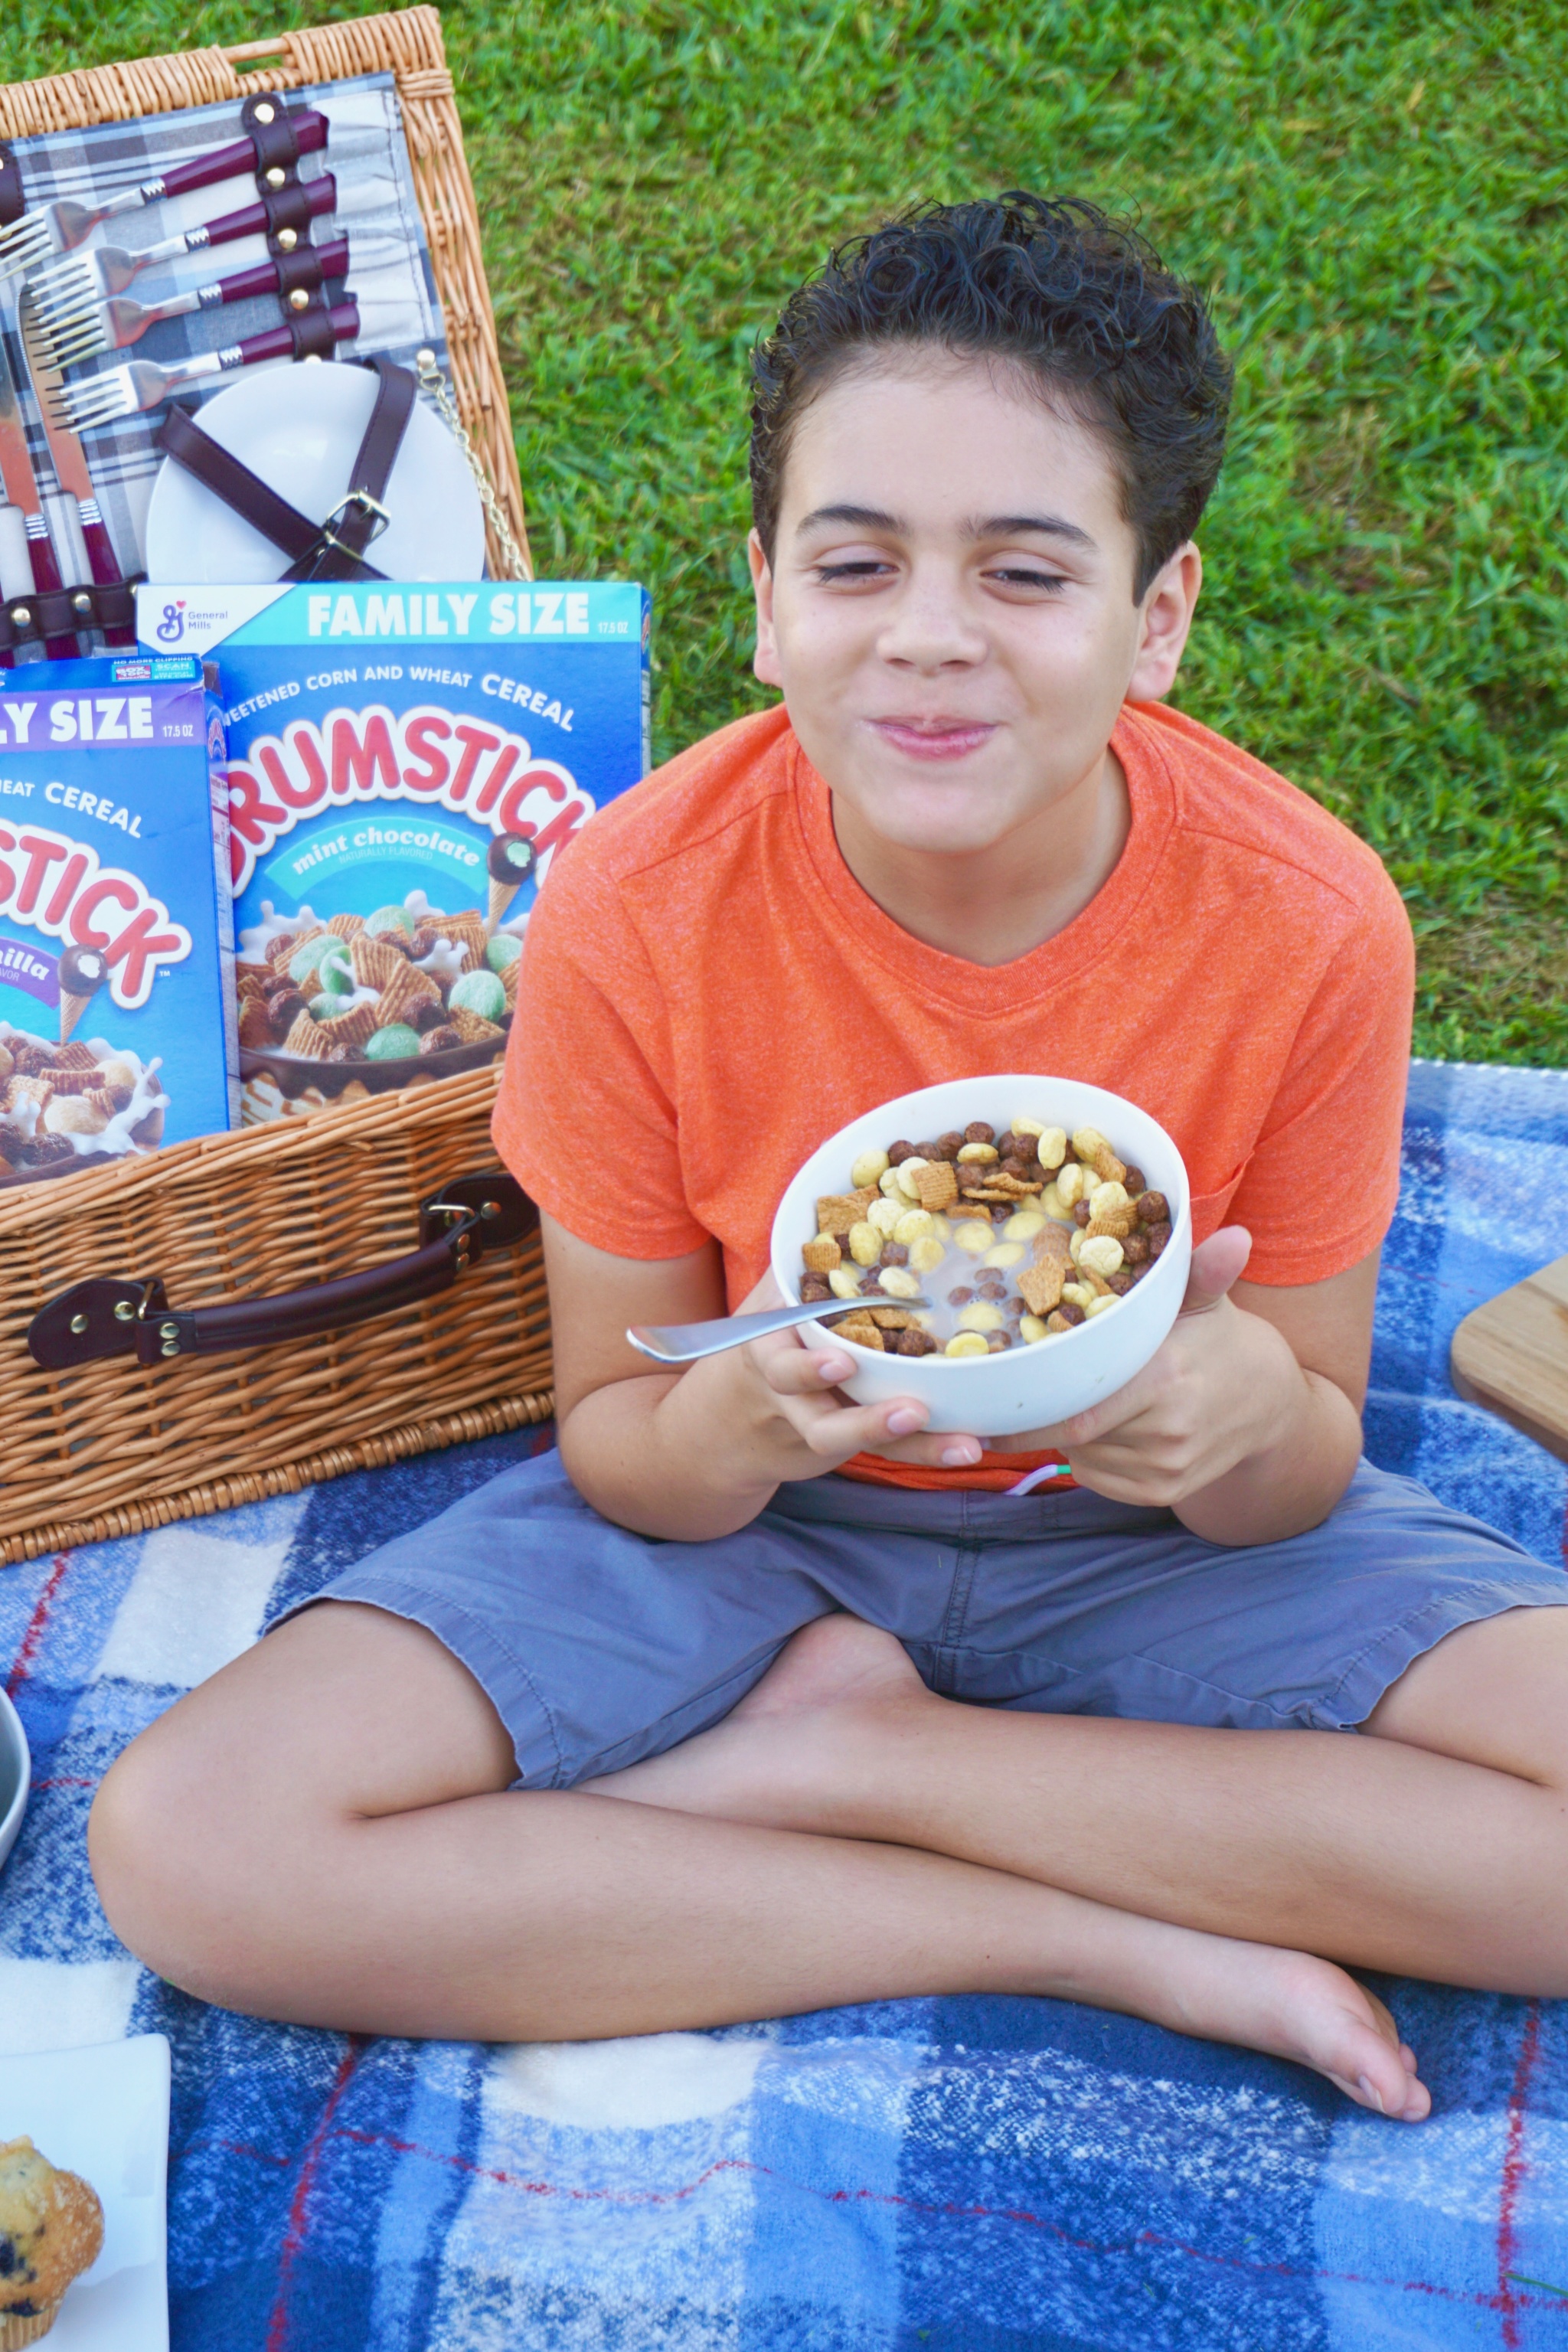 breakfast picnic and other fun summer breakfast ideas